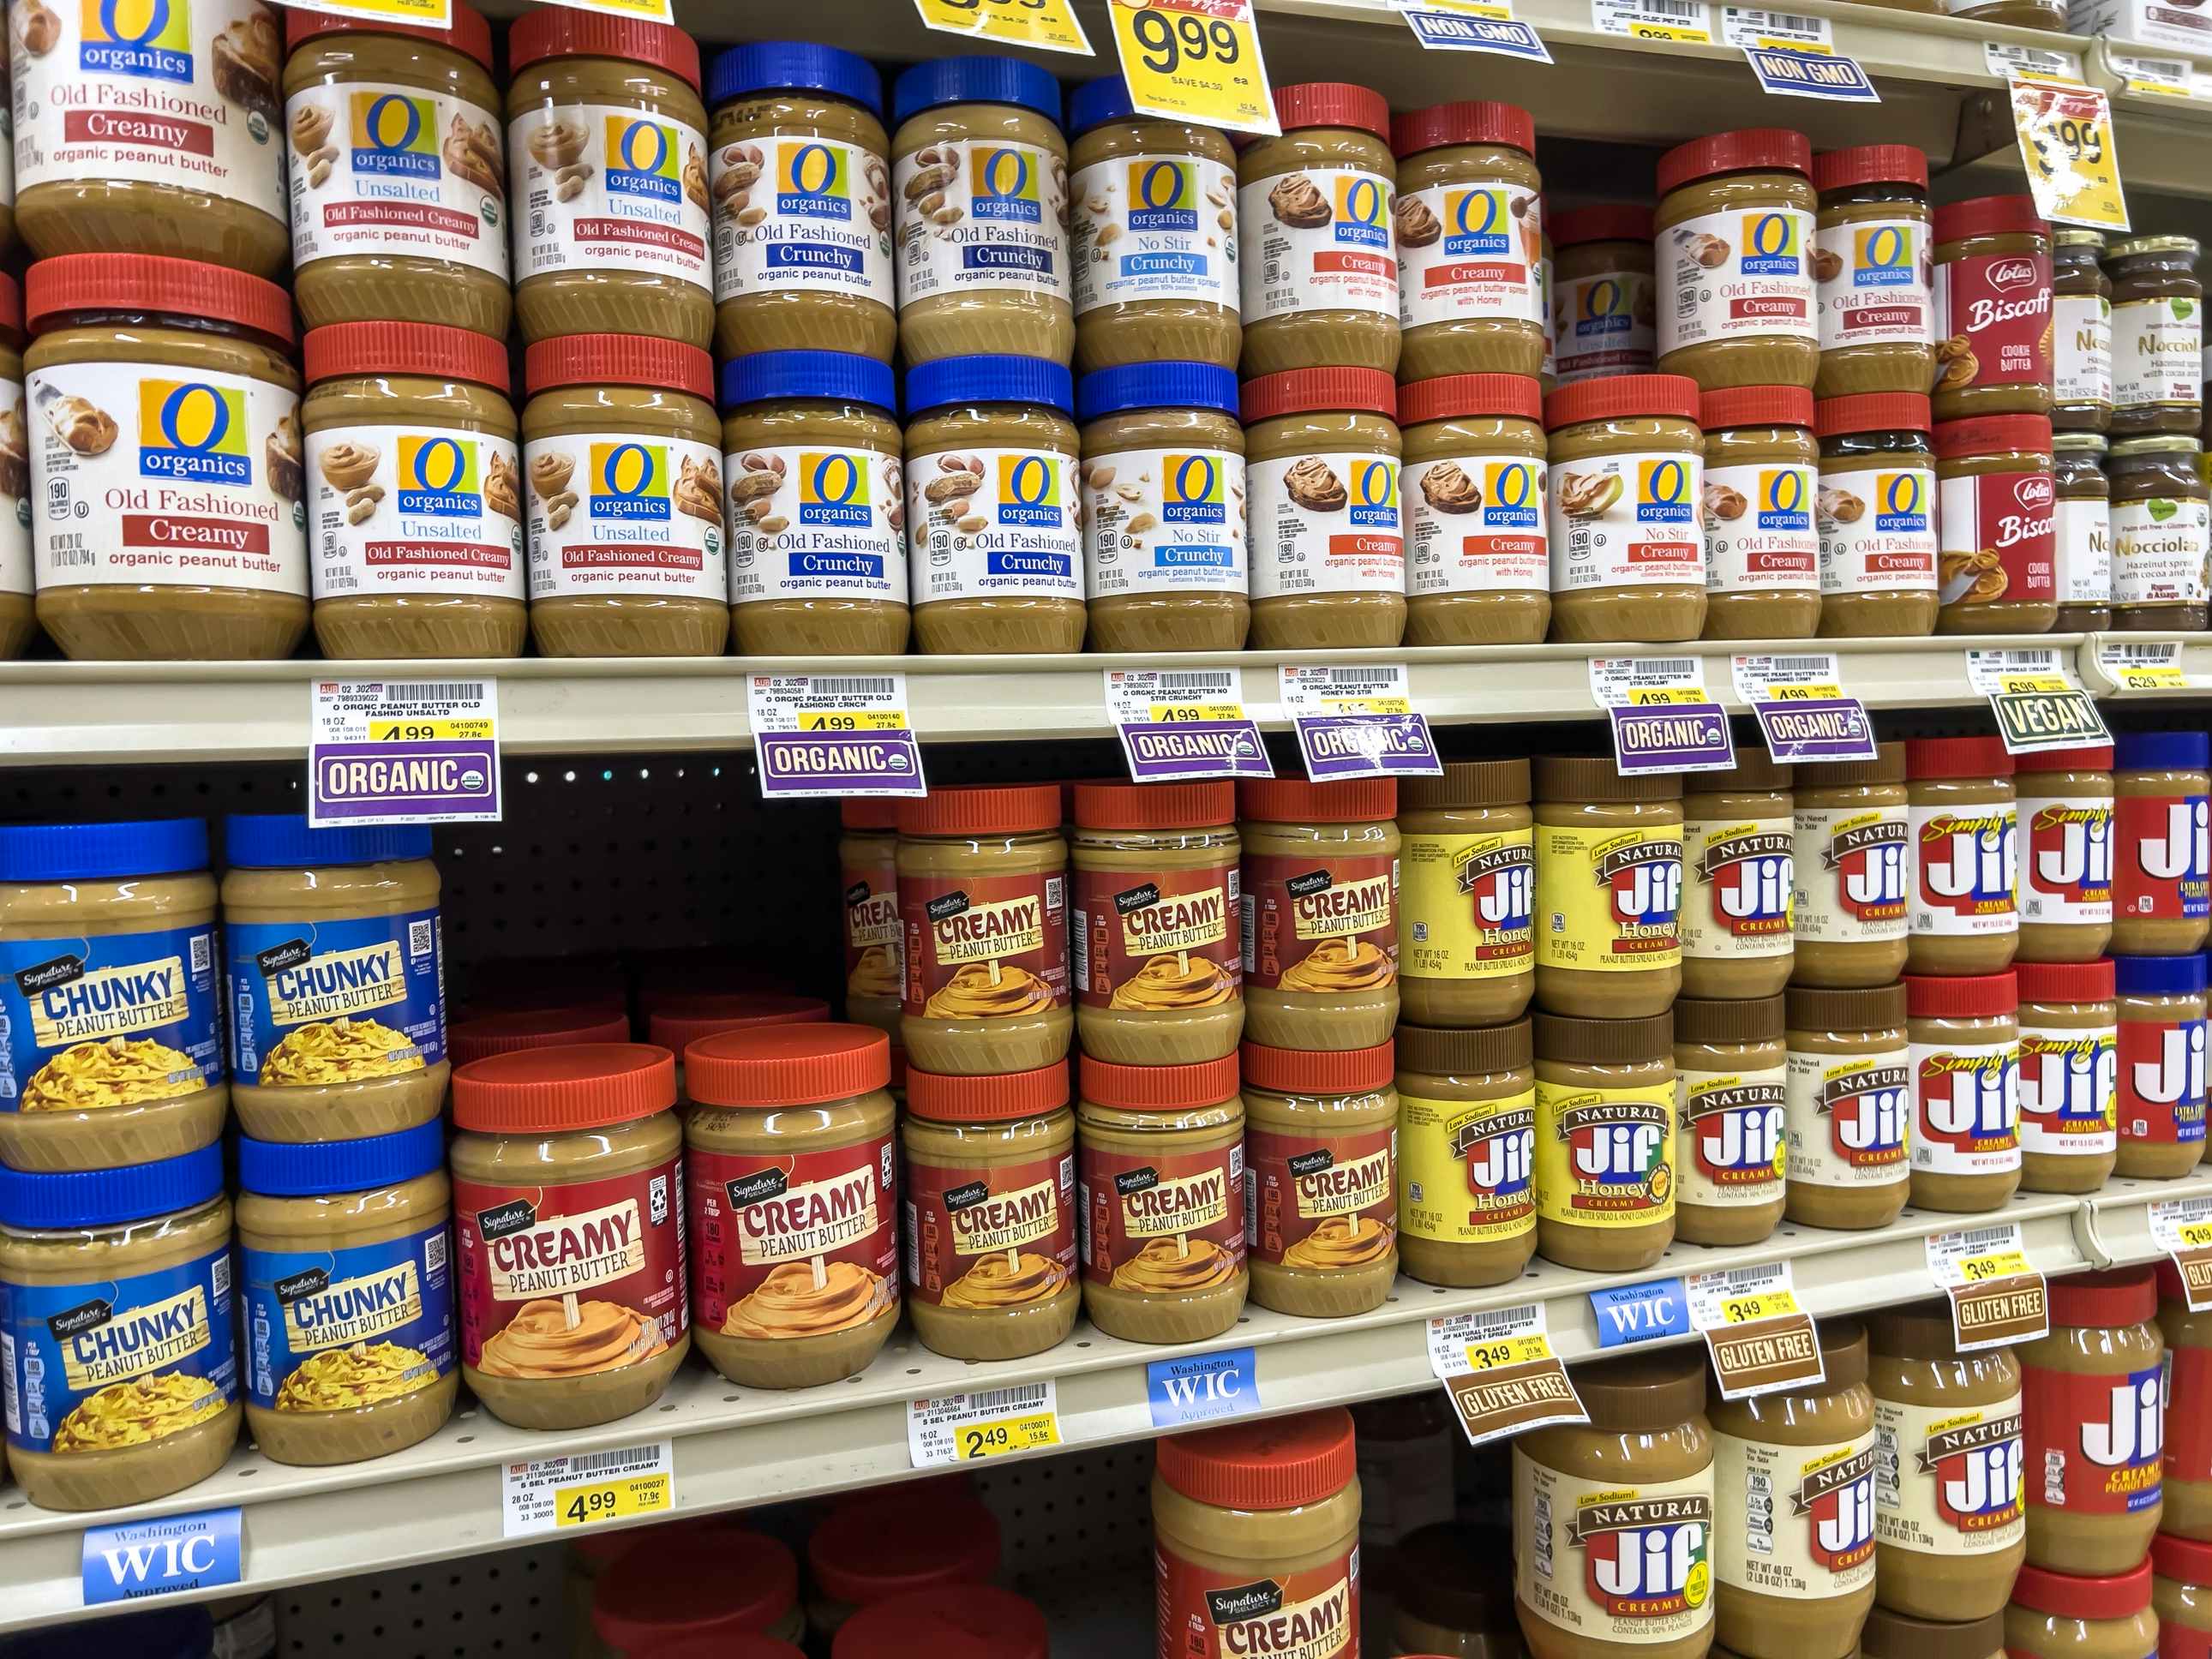 Penut butter brands in a grocery store